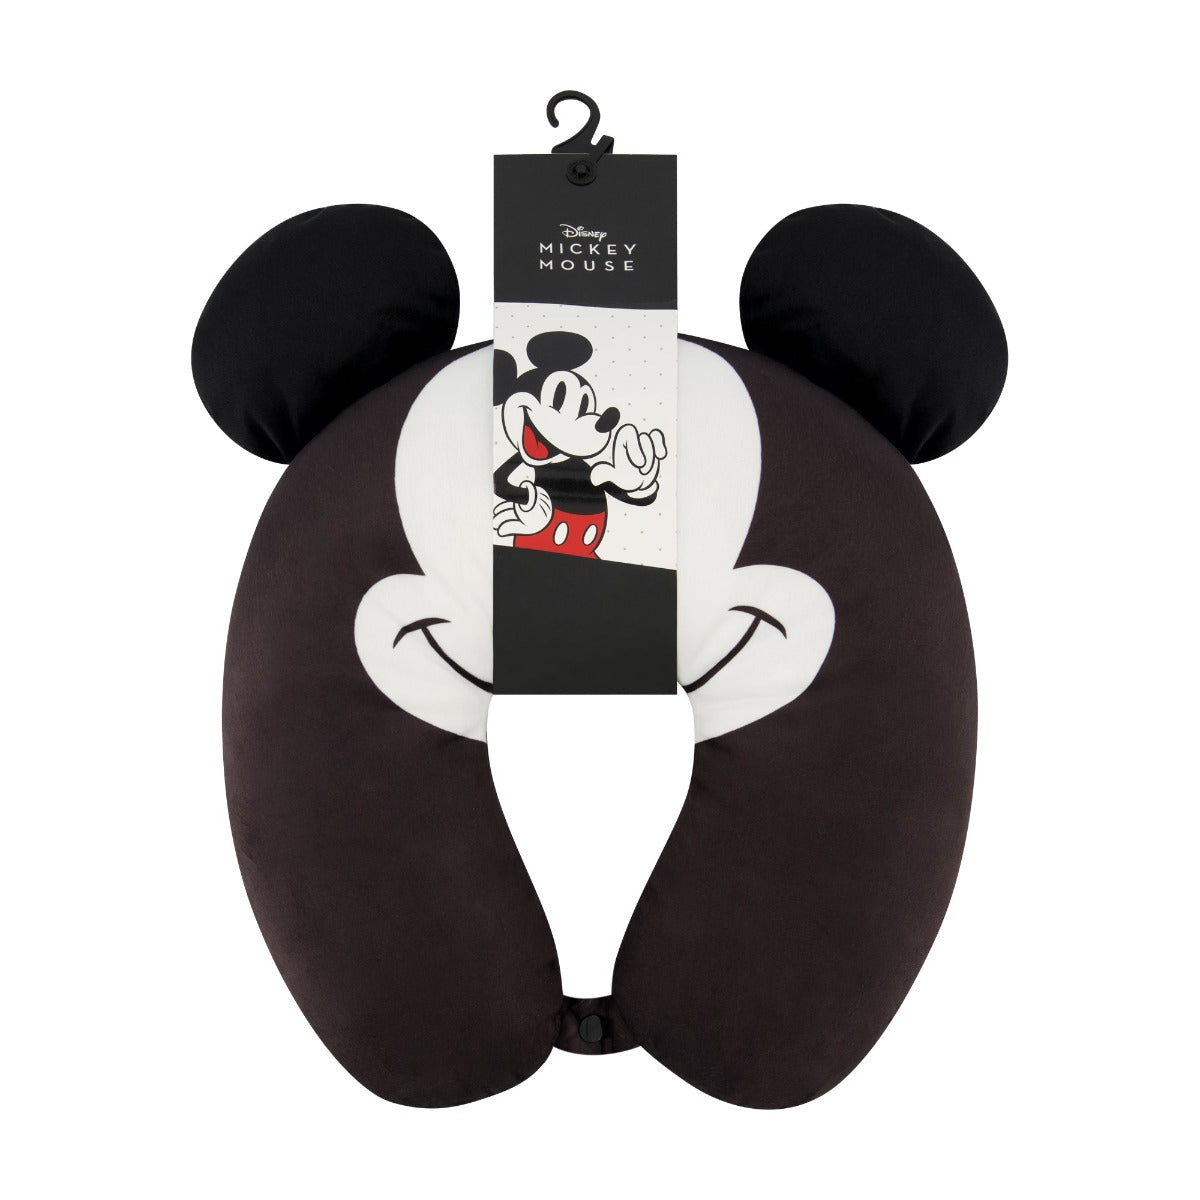 Black Ful Disney Mickey Mouse travel pillow with ears - best neck pillows for adults and children